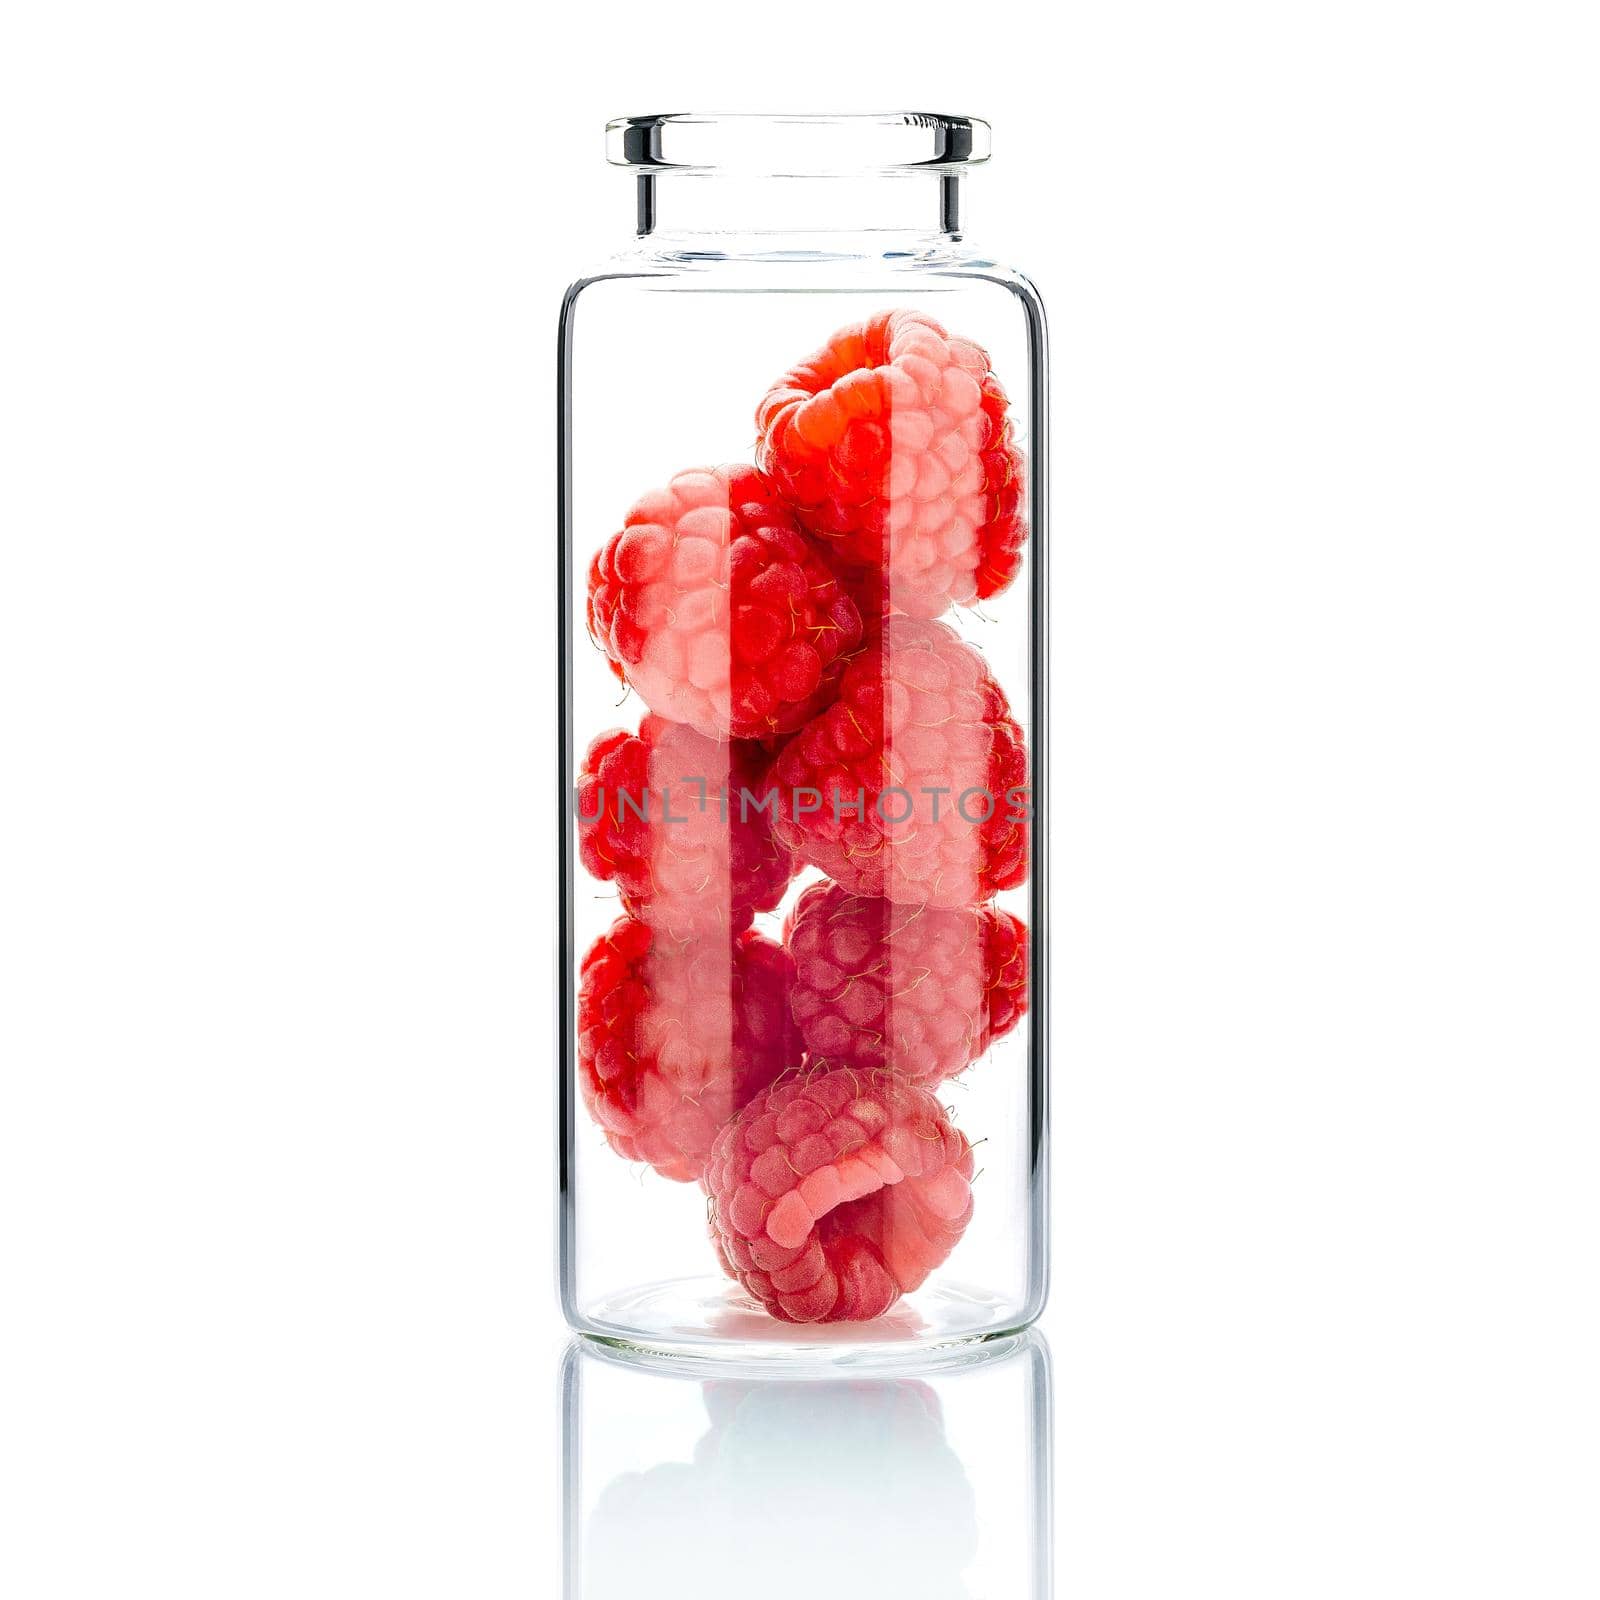  Homemade skin care with raspberry in a glass bottle  isolate on white background. by kerdkanno